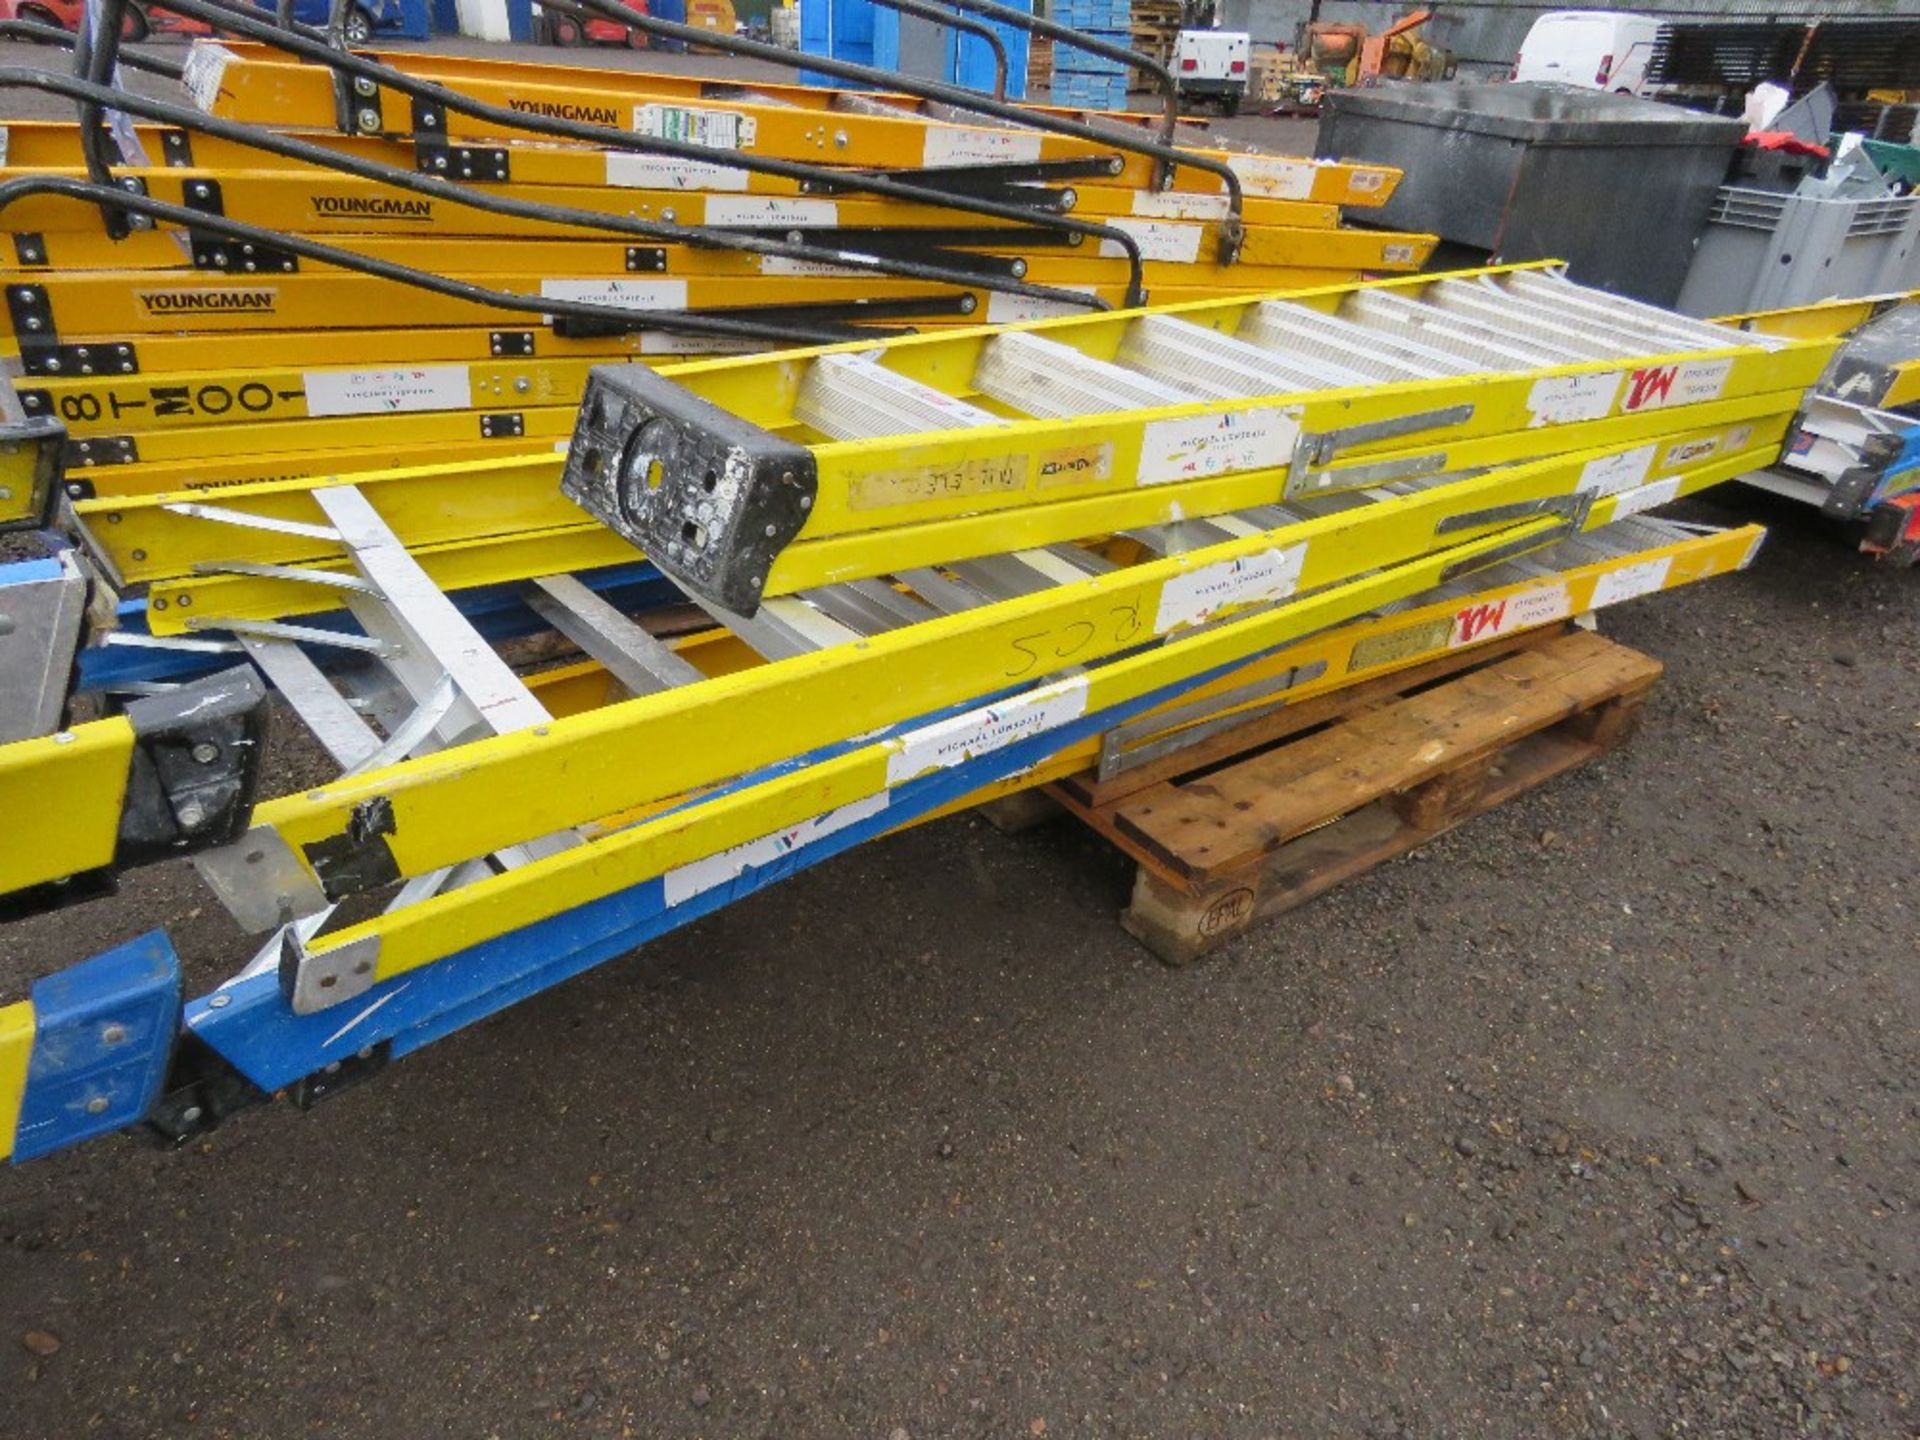 4 X GRP STEP LADDERS. SOURCED FROM LARGE CONSTRUCTION COMPANY LIQUIDATION.